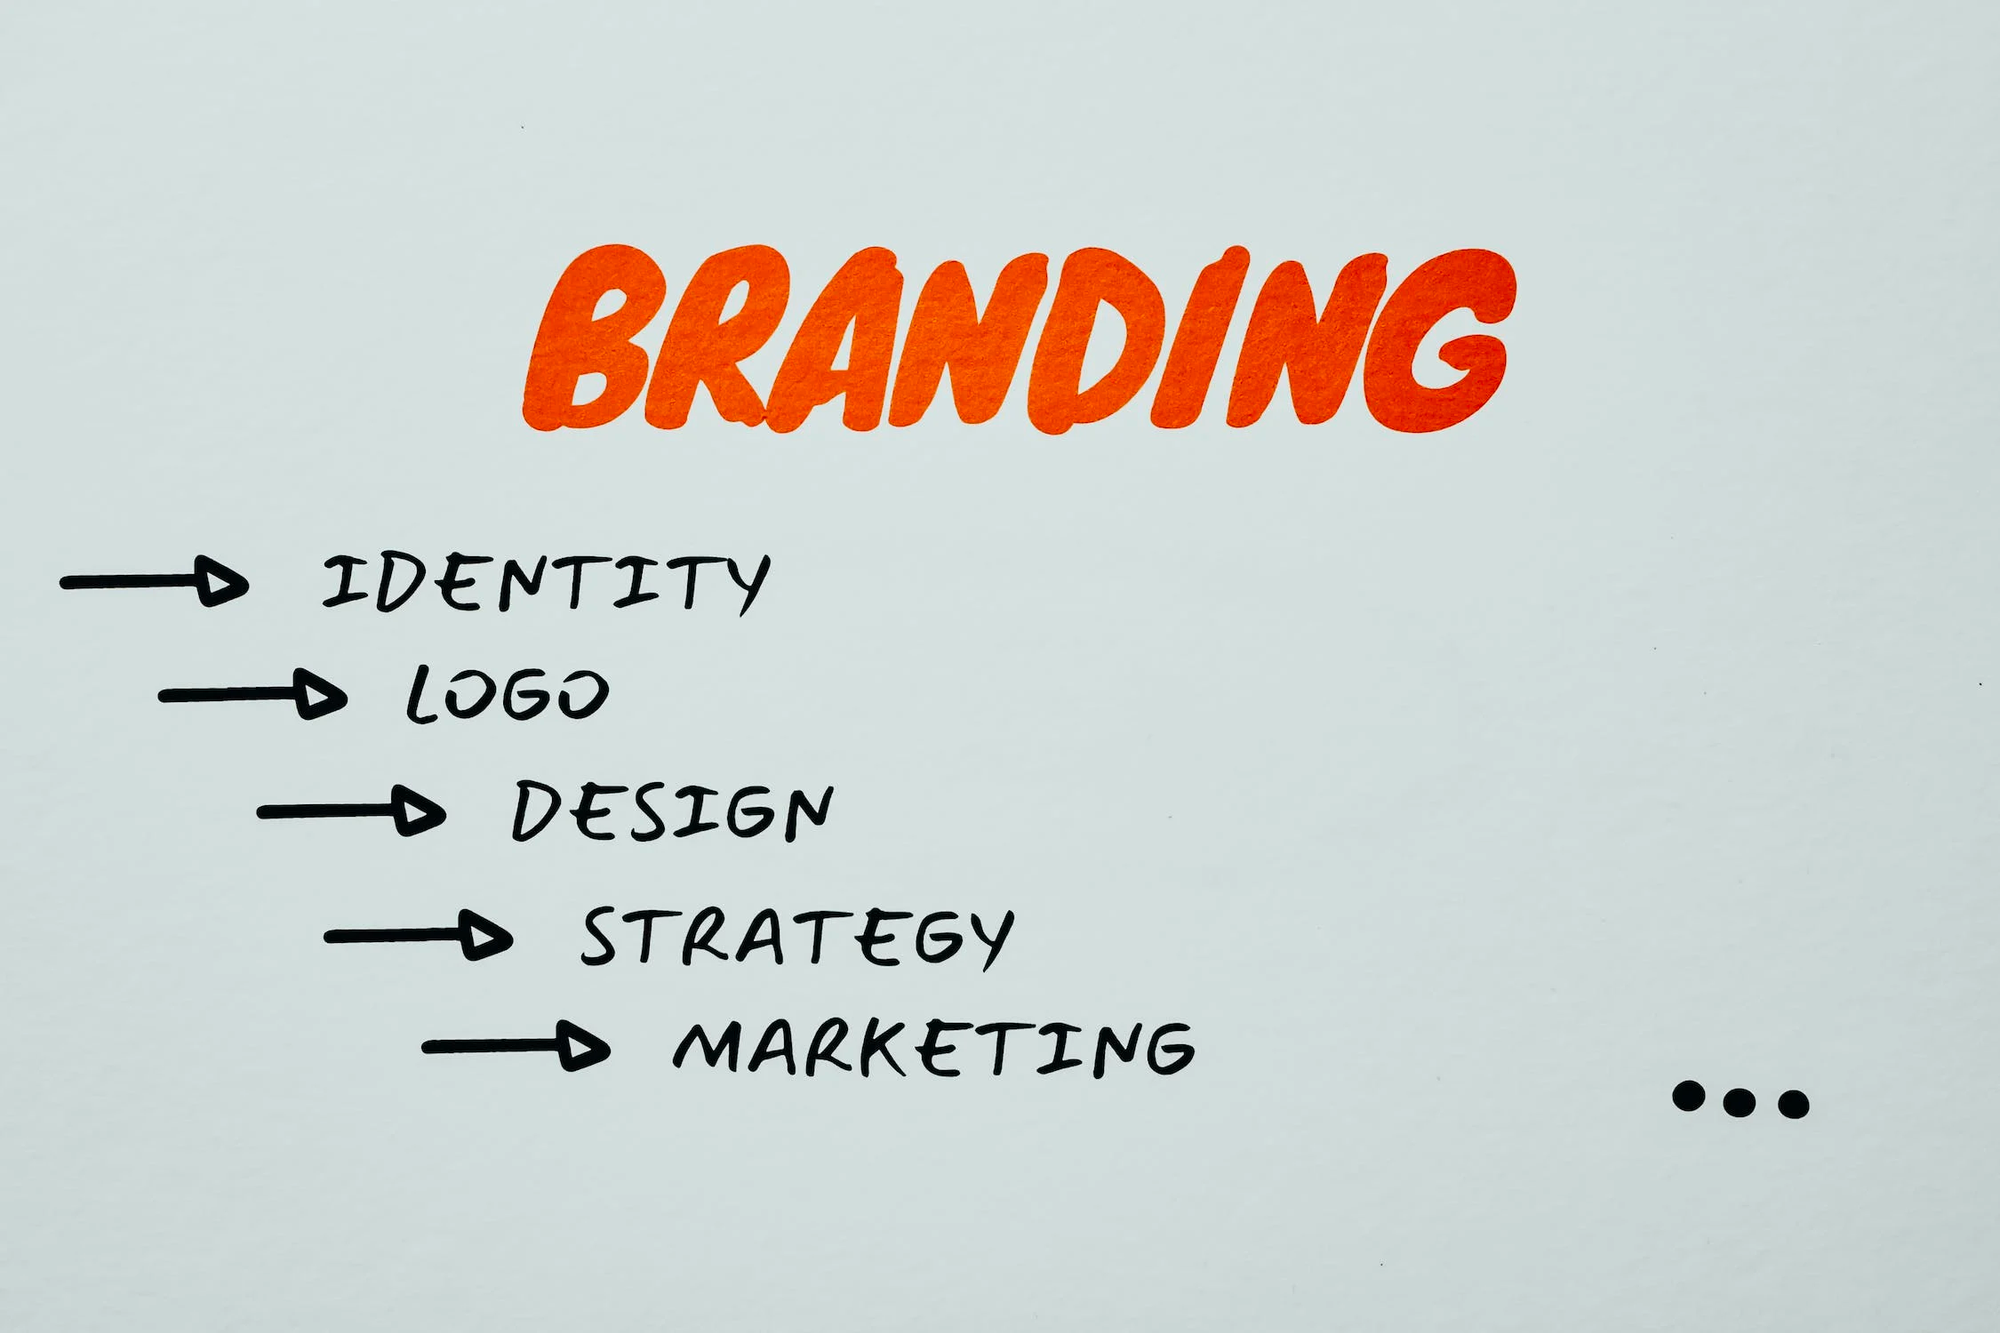 marketing strategy example in a business plan